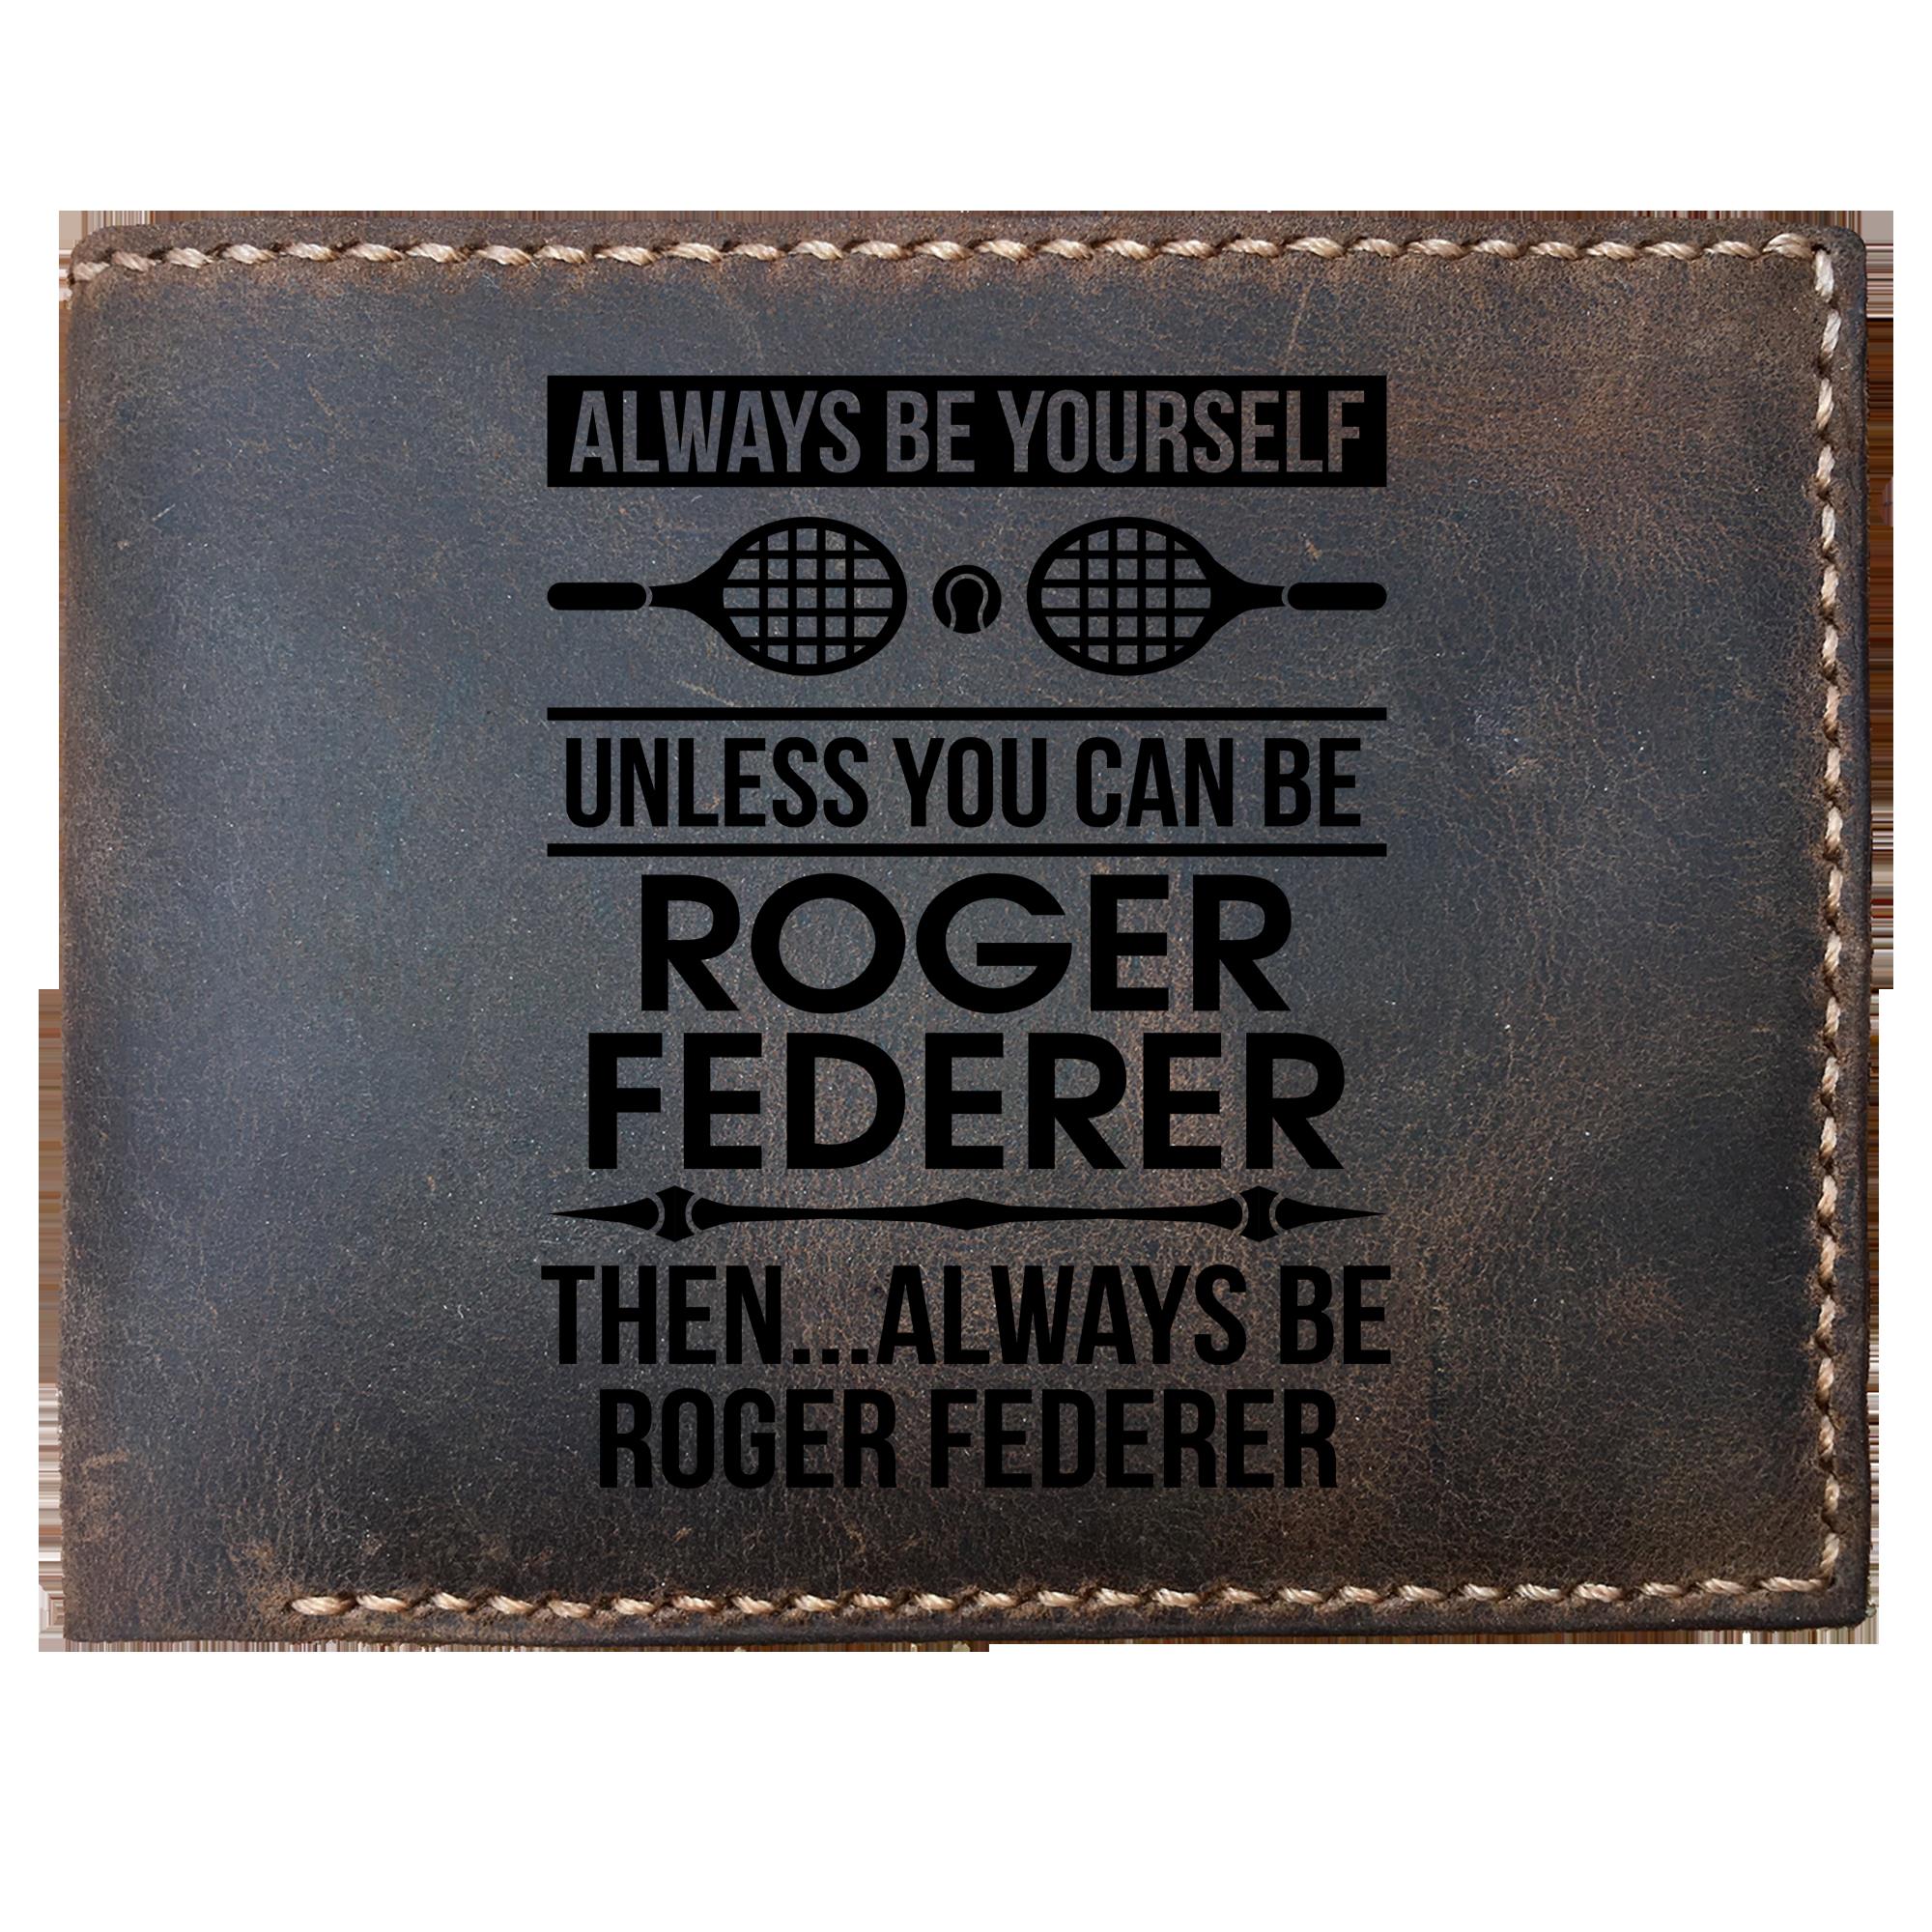 Skitongifts Funny Custom Laser Engraved Bifold Leather Wallet For Men, Always Be Yourself Unless You Can Be Roger Federer, Funny